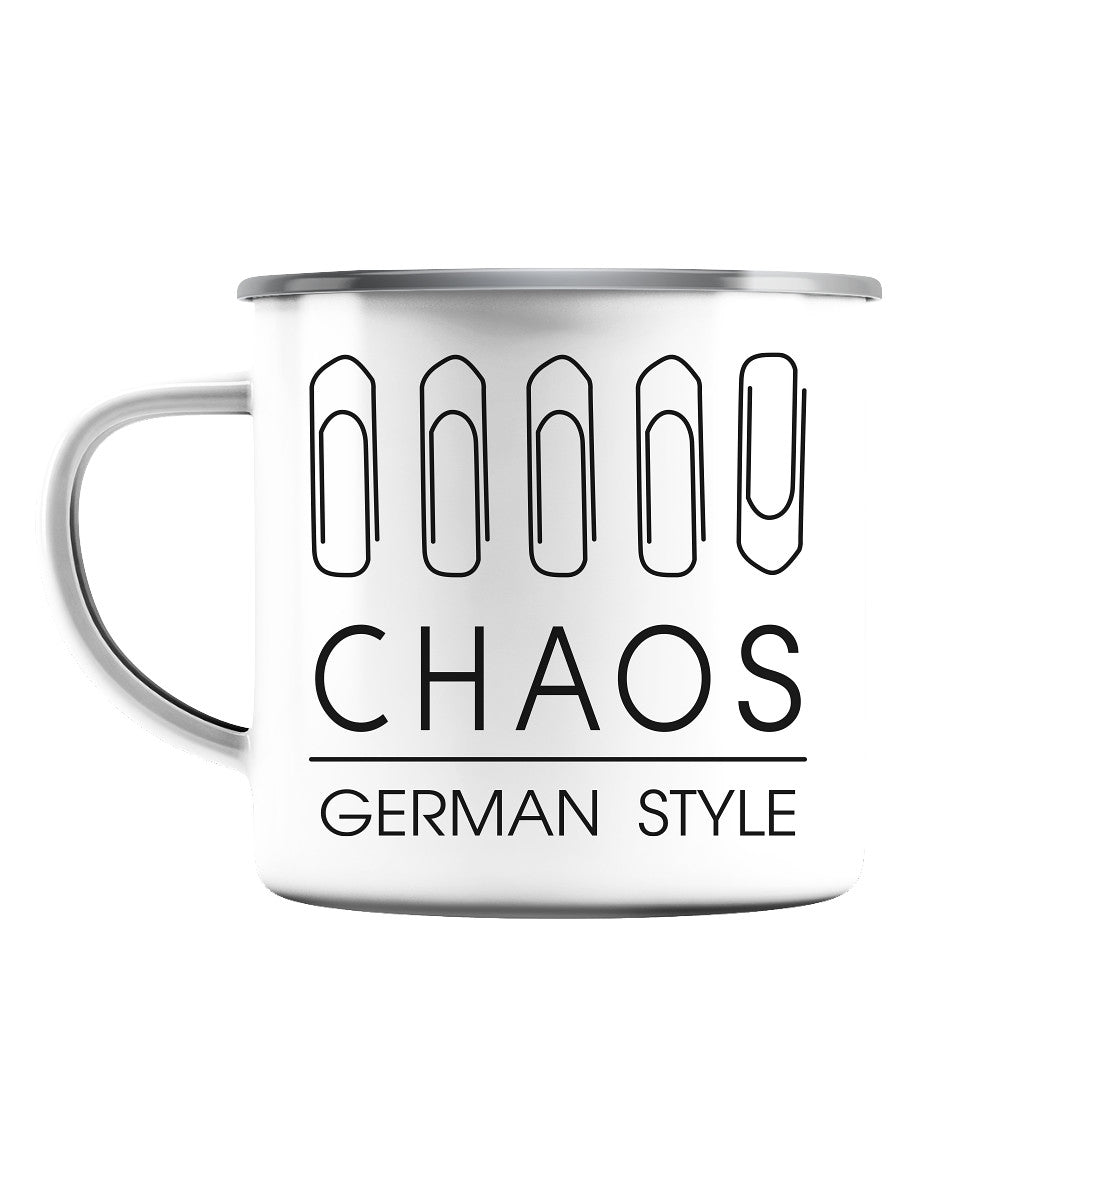 Chaos German Style - Emaille Tasse (Silber)